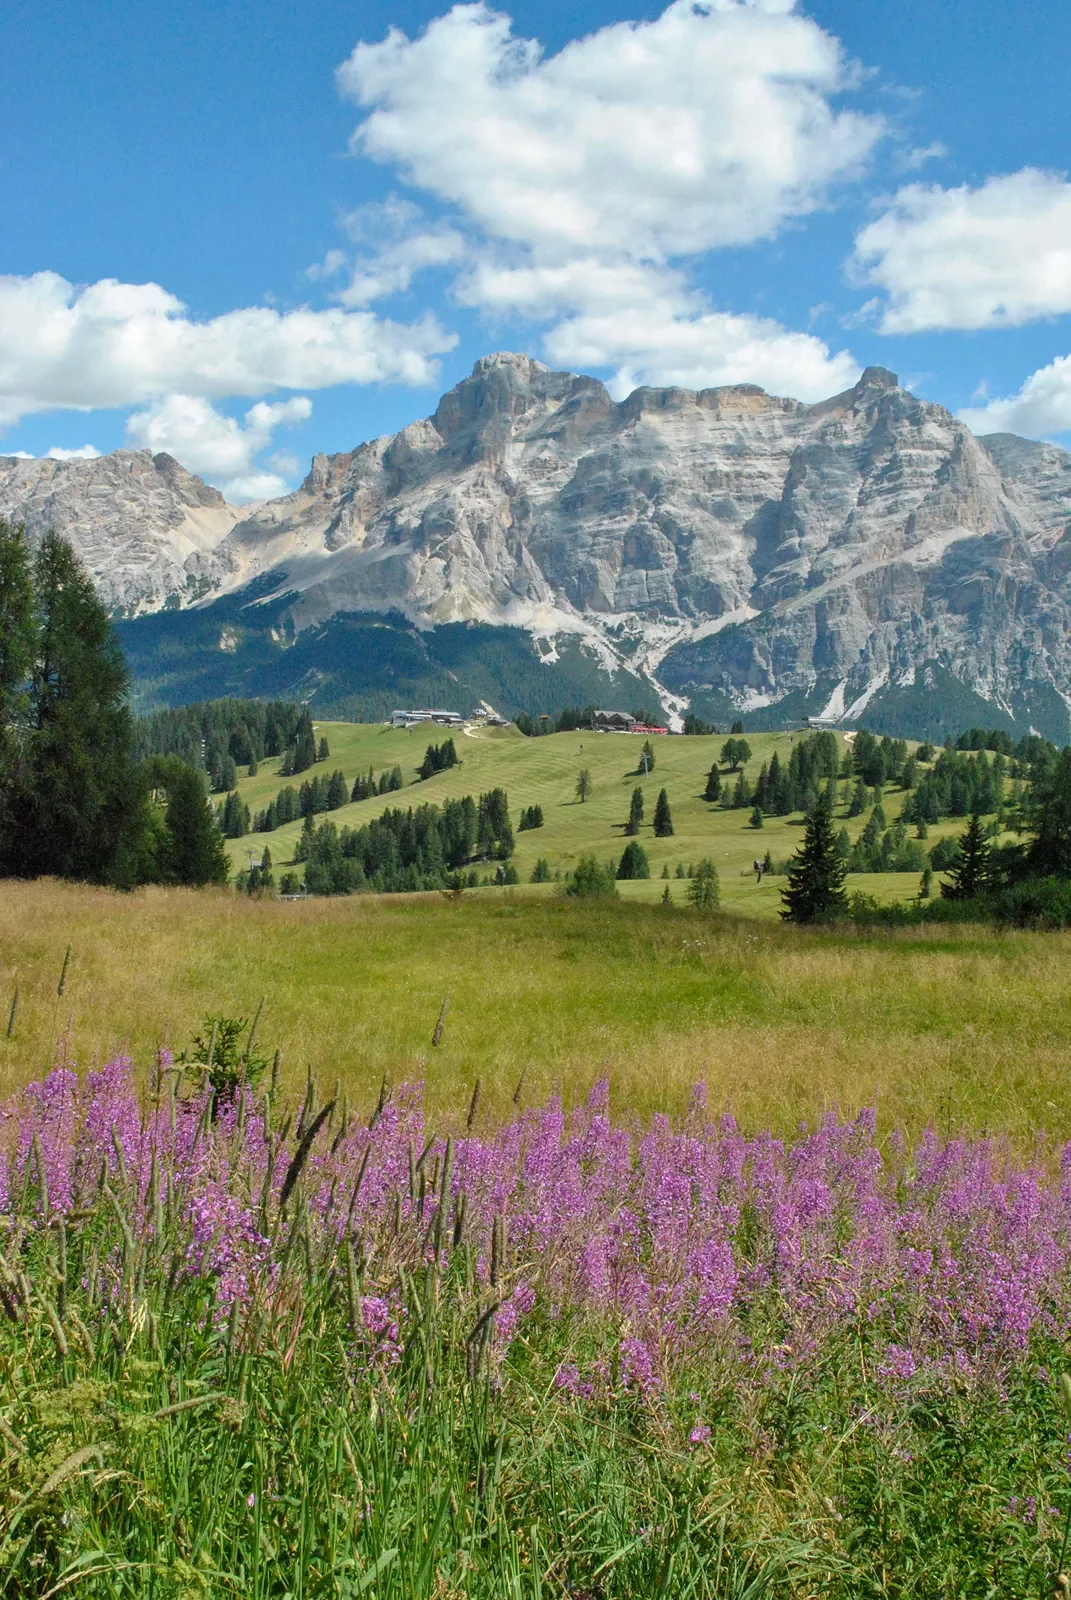 Wide shot of the Dolomites, hilltop village in middleground, purple flowers in foreground.